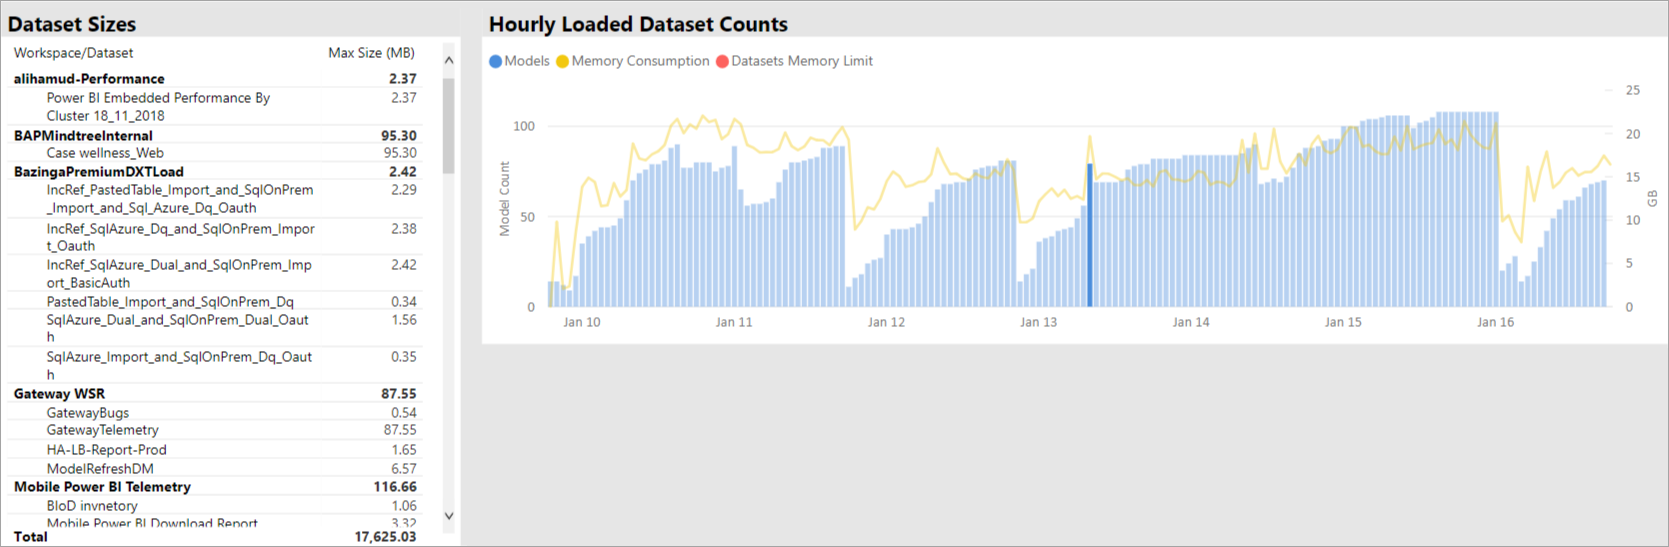 A local spike in loaded datasets suggests interactive querying delayed start of refreshes